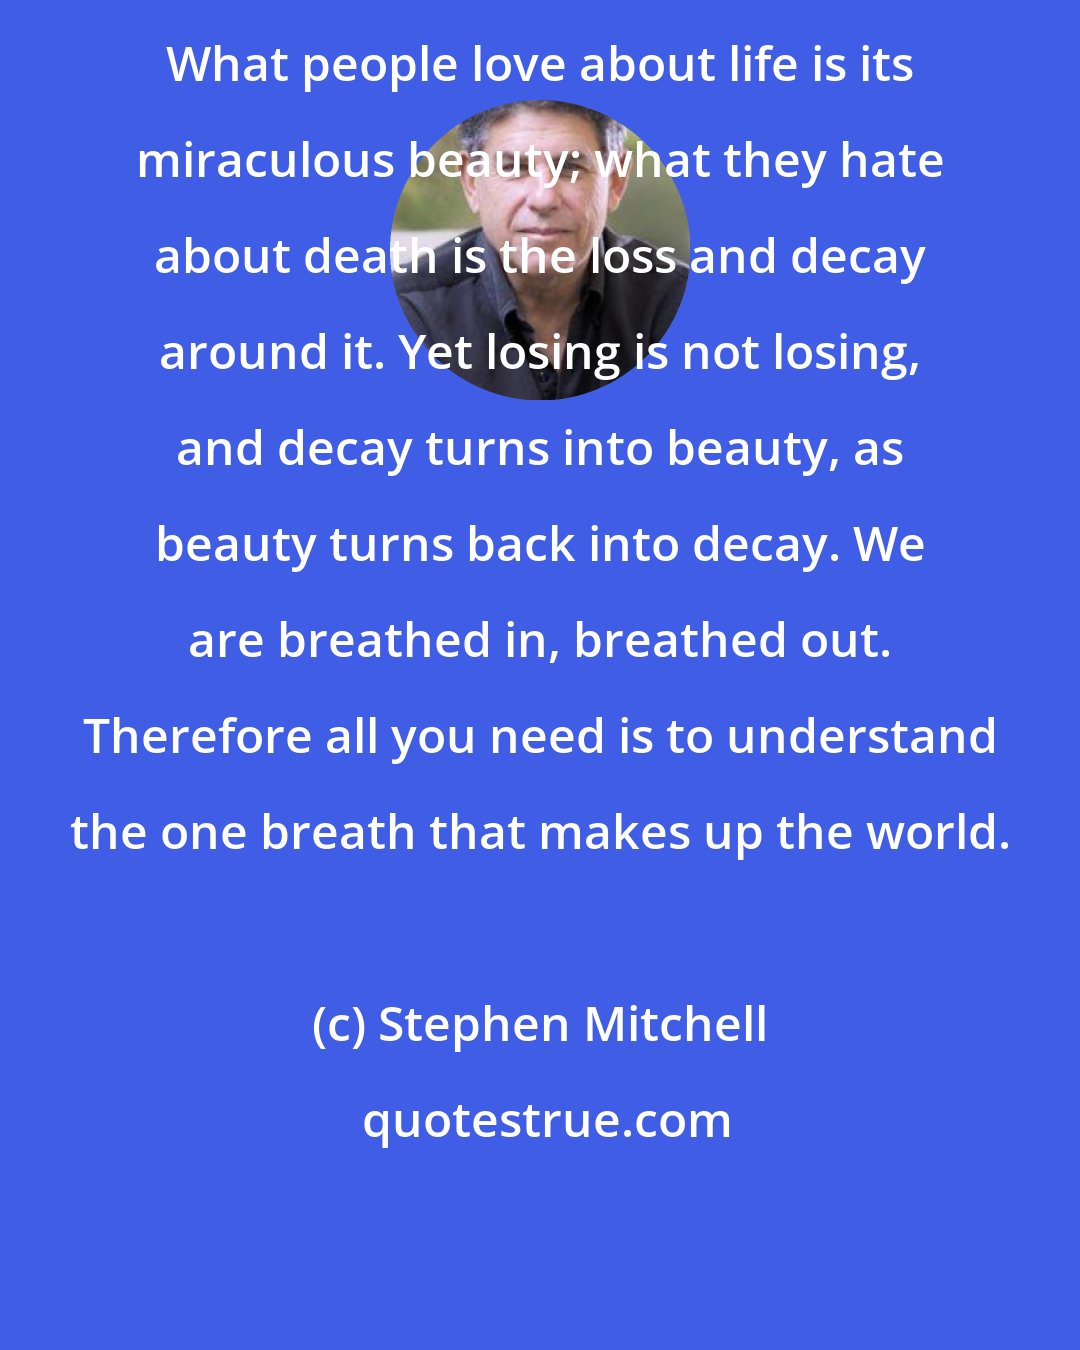 Stephen Mitchell: What people love about life is its miraculous beauty; what they hate about death is the loss and decay around it. Yet losing is not losing, and decay turns into beauty, as beauty turns back into decay. We are breathed in, breathed out. Therefore all you need is to understand the one breath that makes up the world.